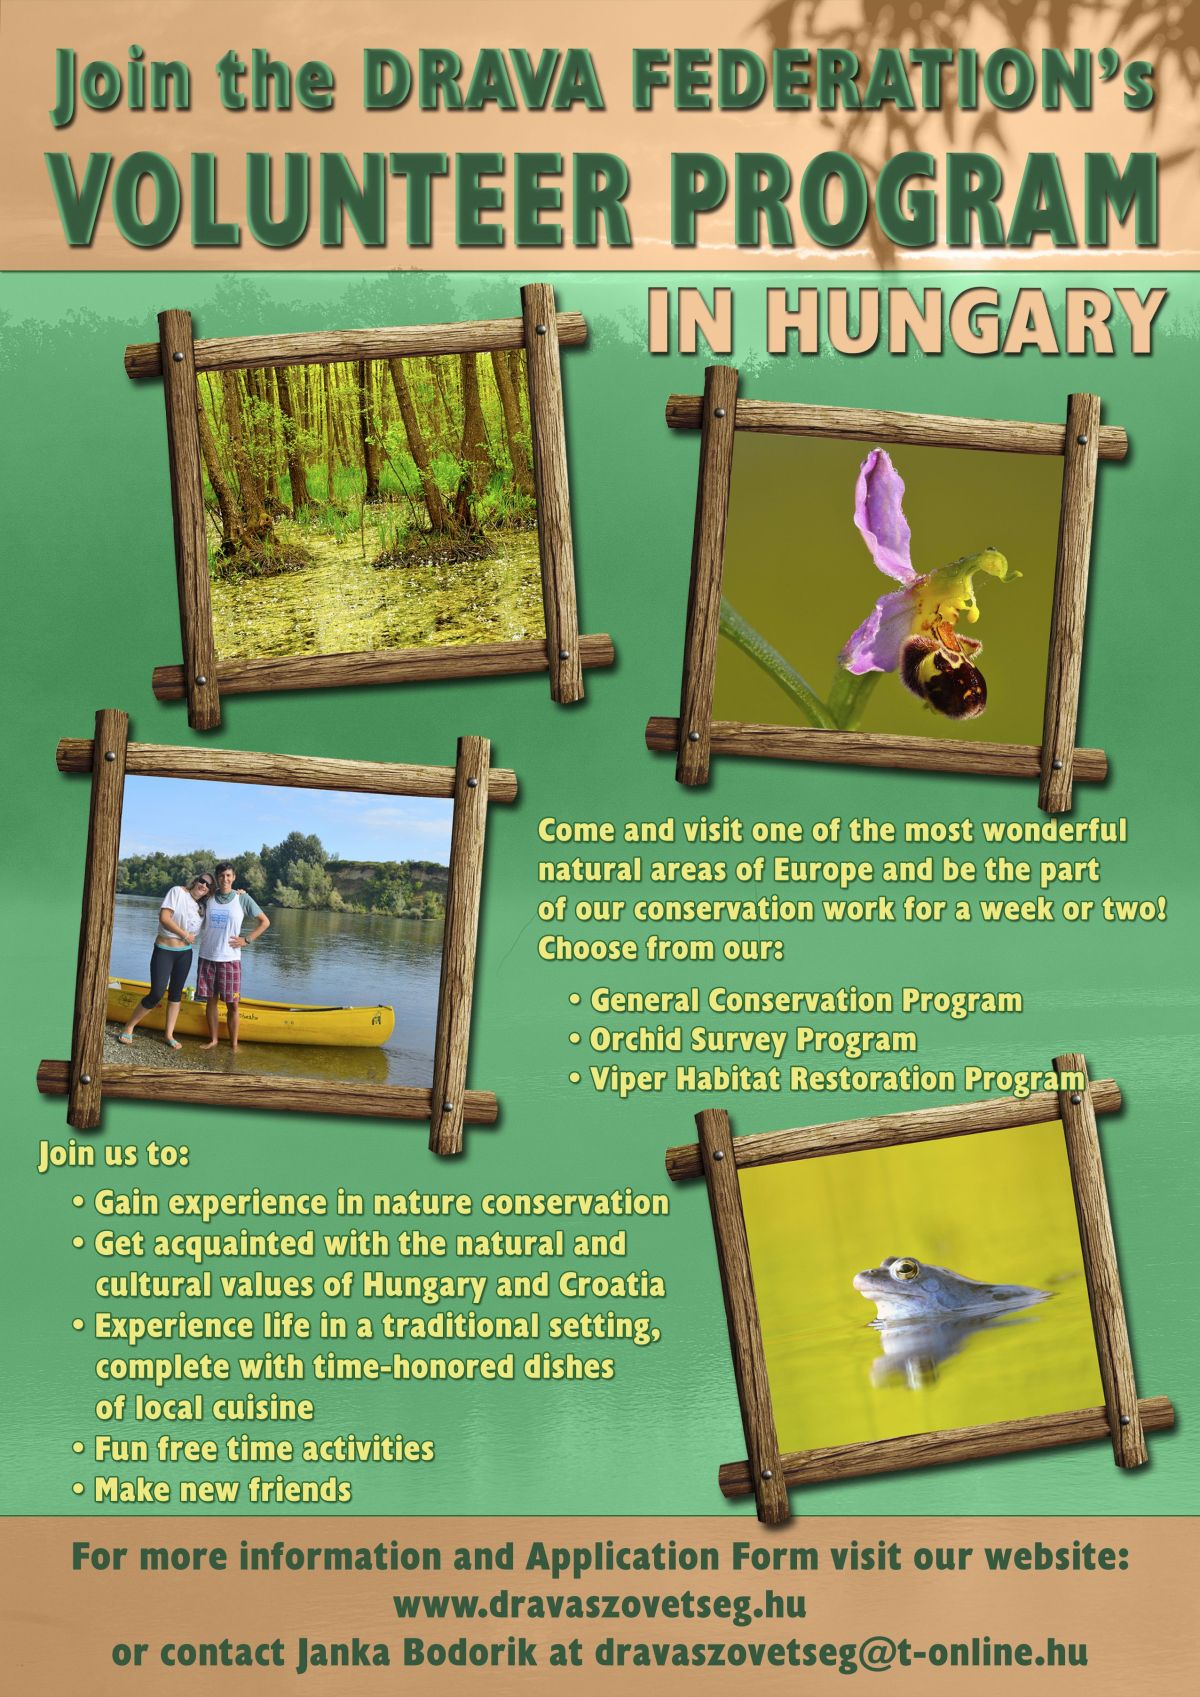 Drava Poster 2 in Hungary a